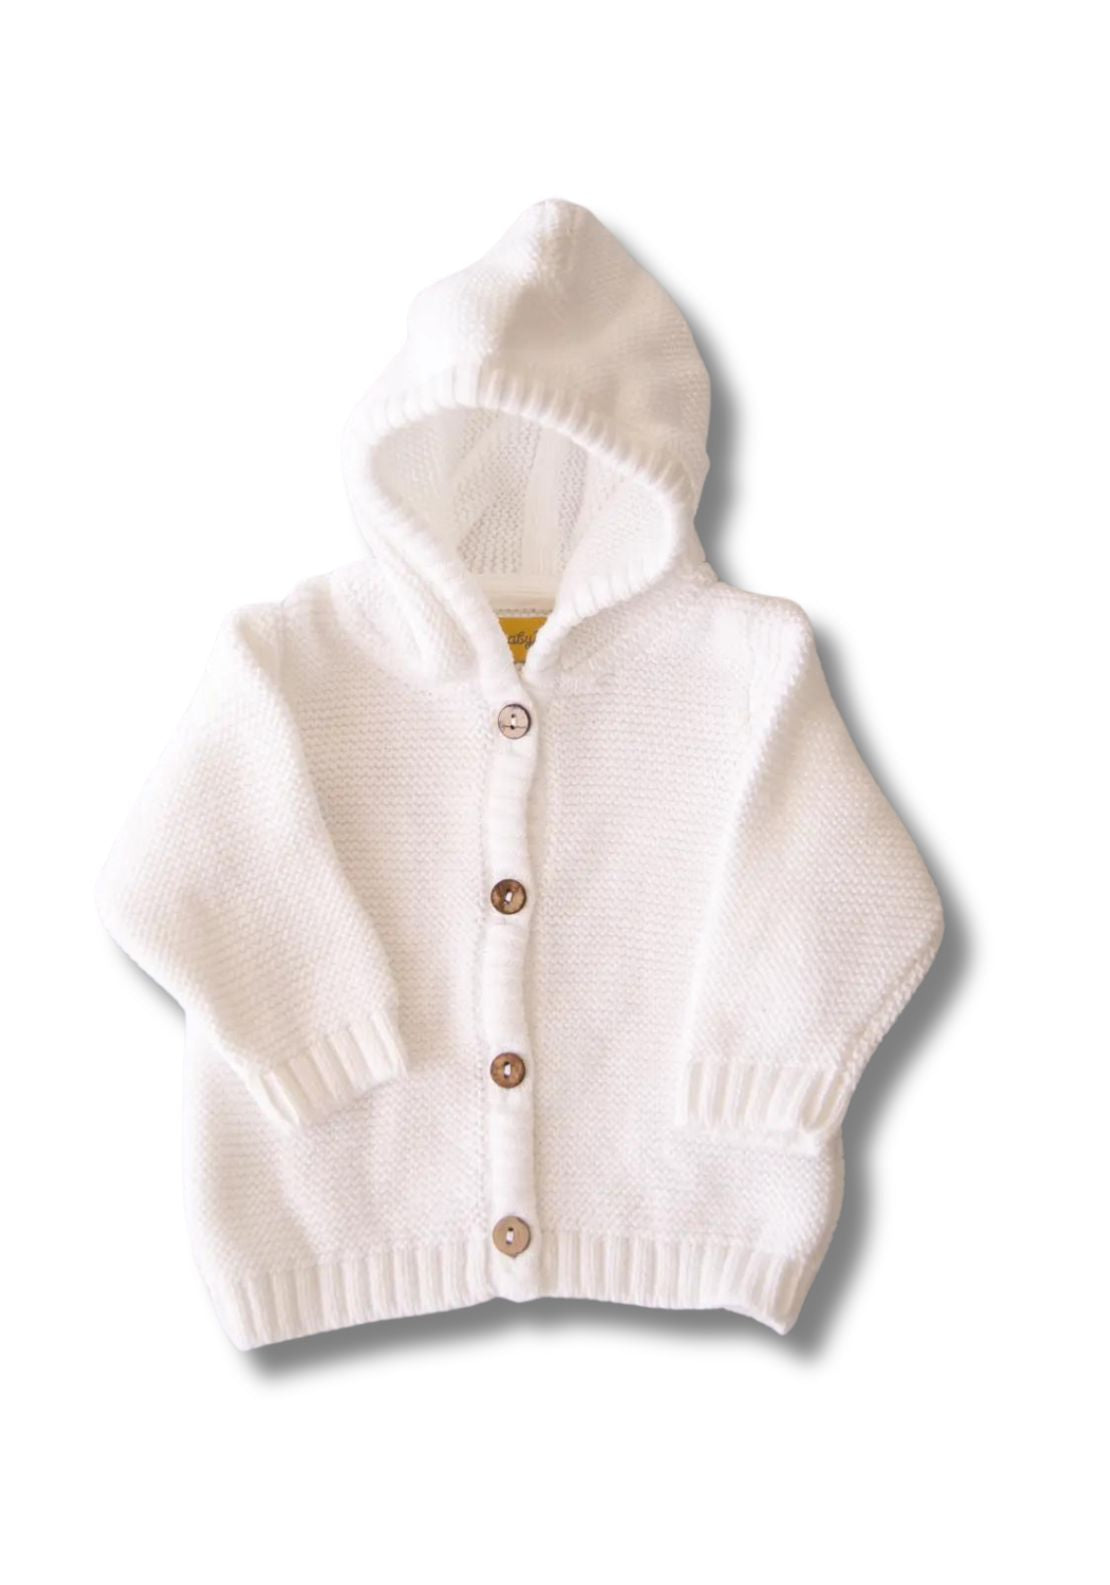 Babyboo Hooded Cardigan - White 1 Shaws Department Stores